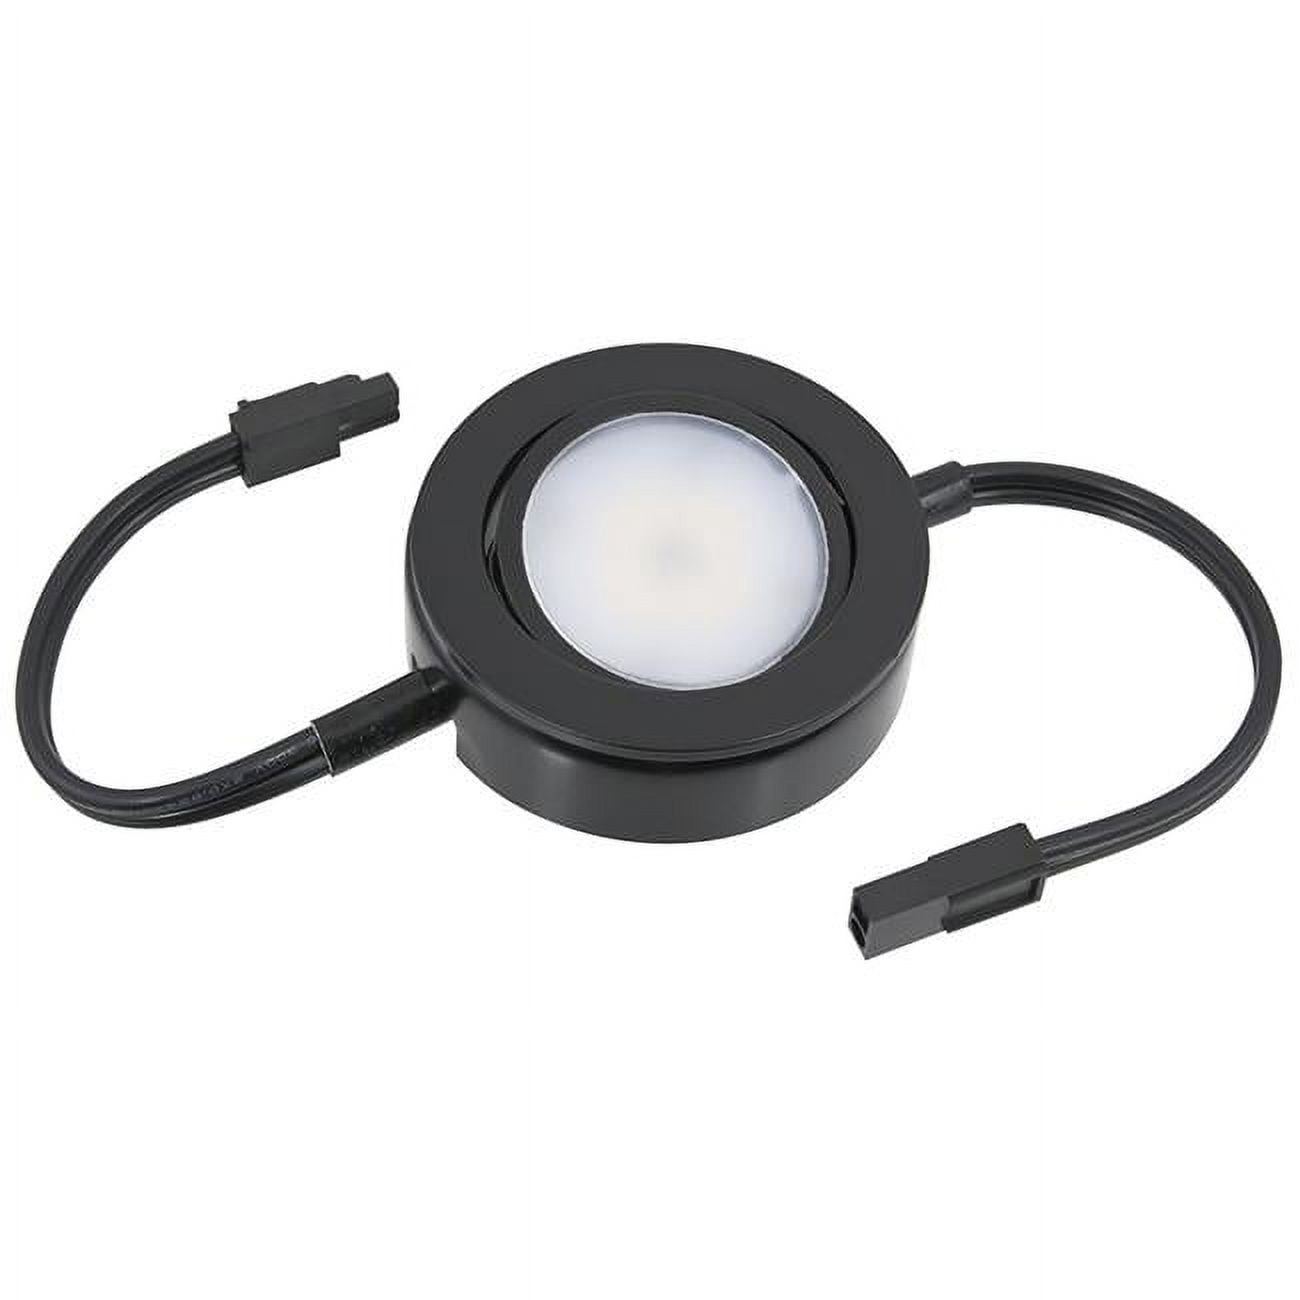 Americanlighting Mvp-1-bk-b Dimmable Led Puck Light With 6 In. Lead Wire, 6 In. Tail Wire & Mounting Screws - 120 V Ac, 4 Watt - Black